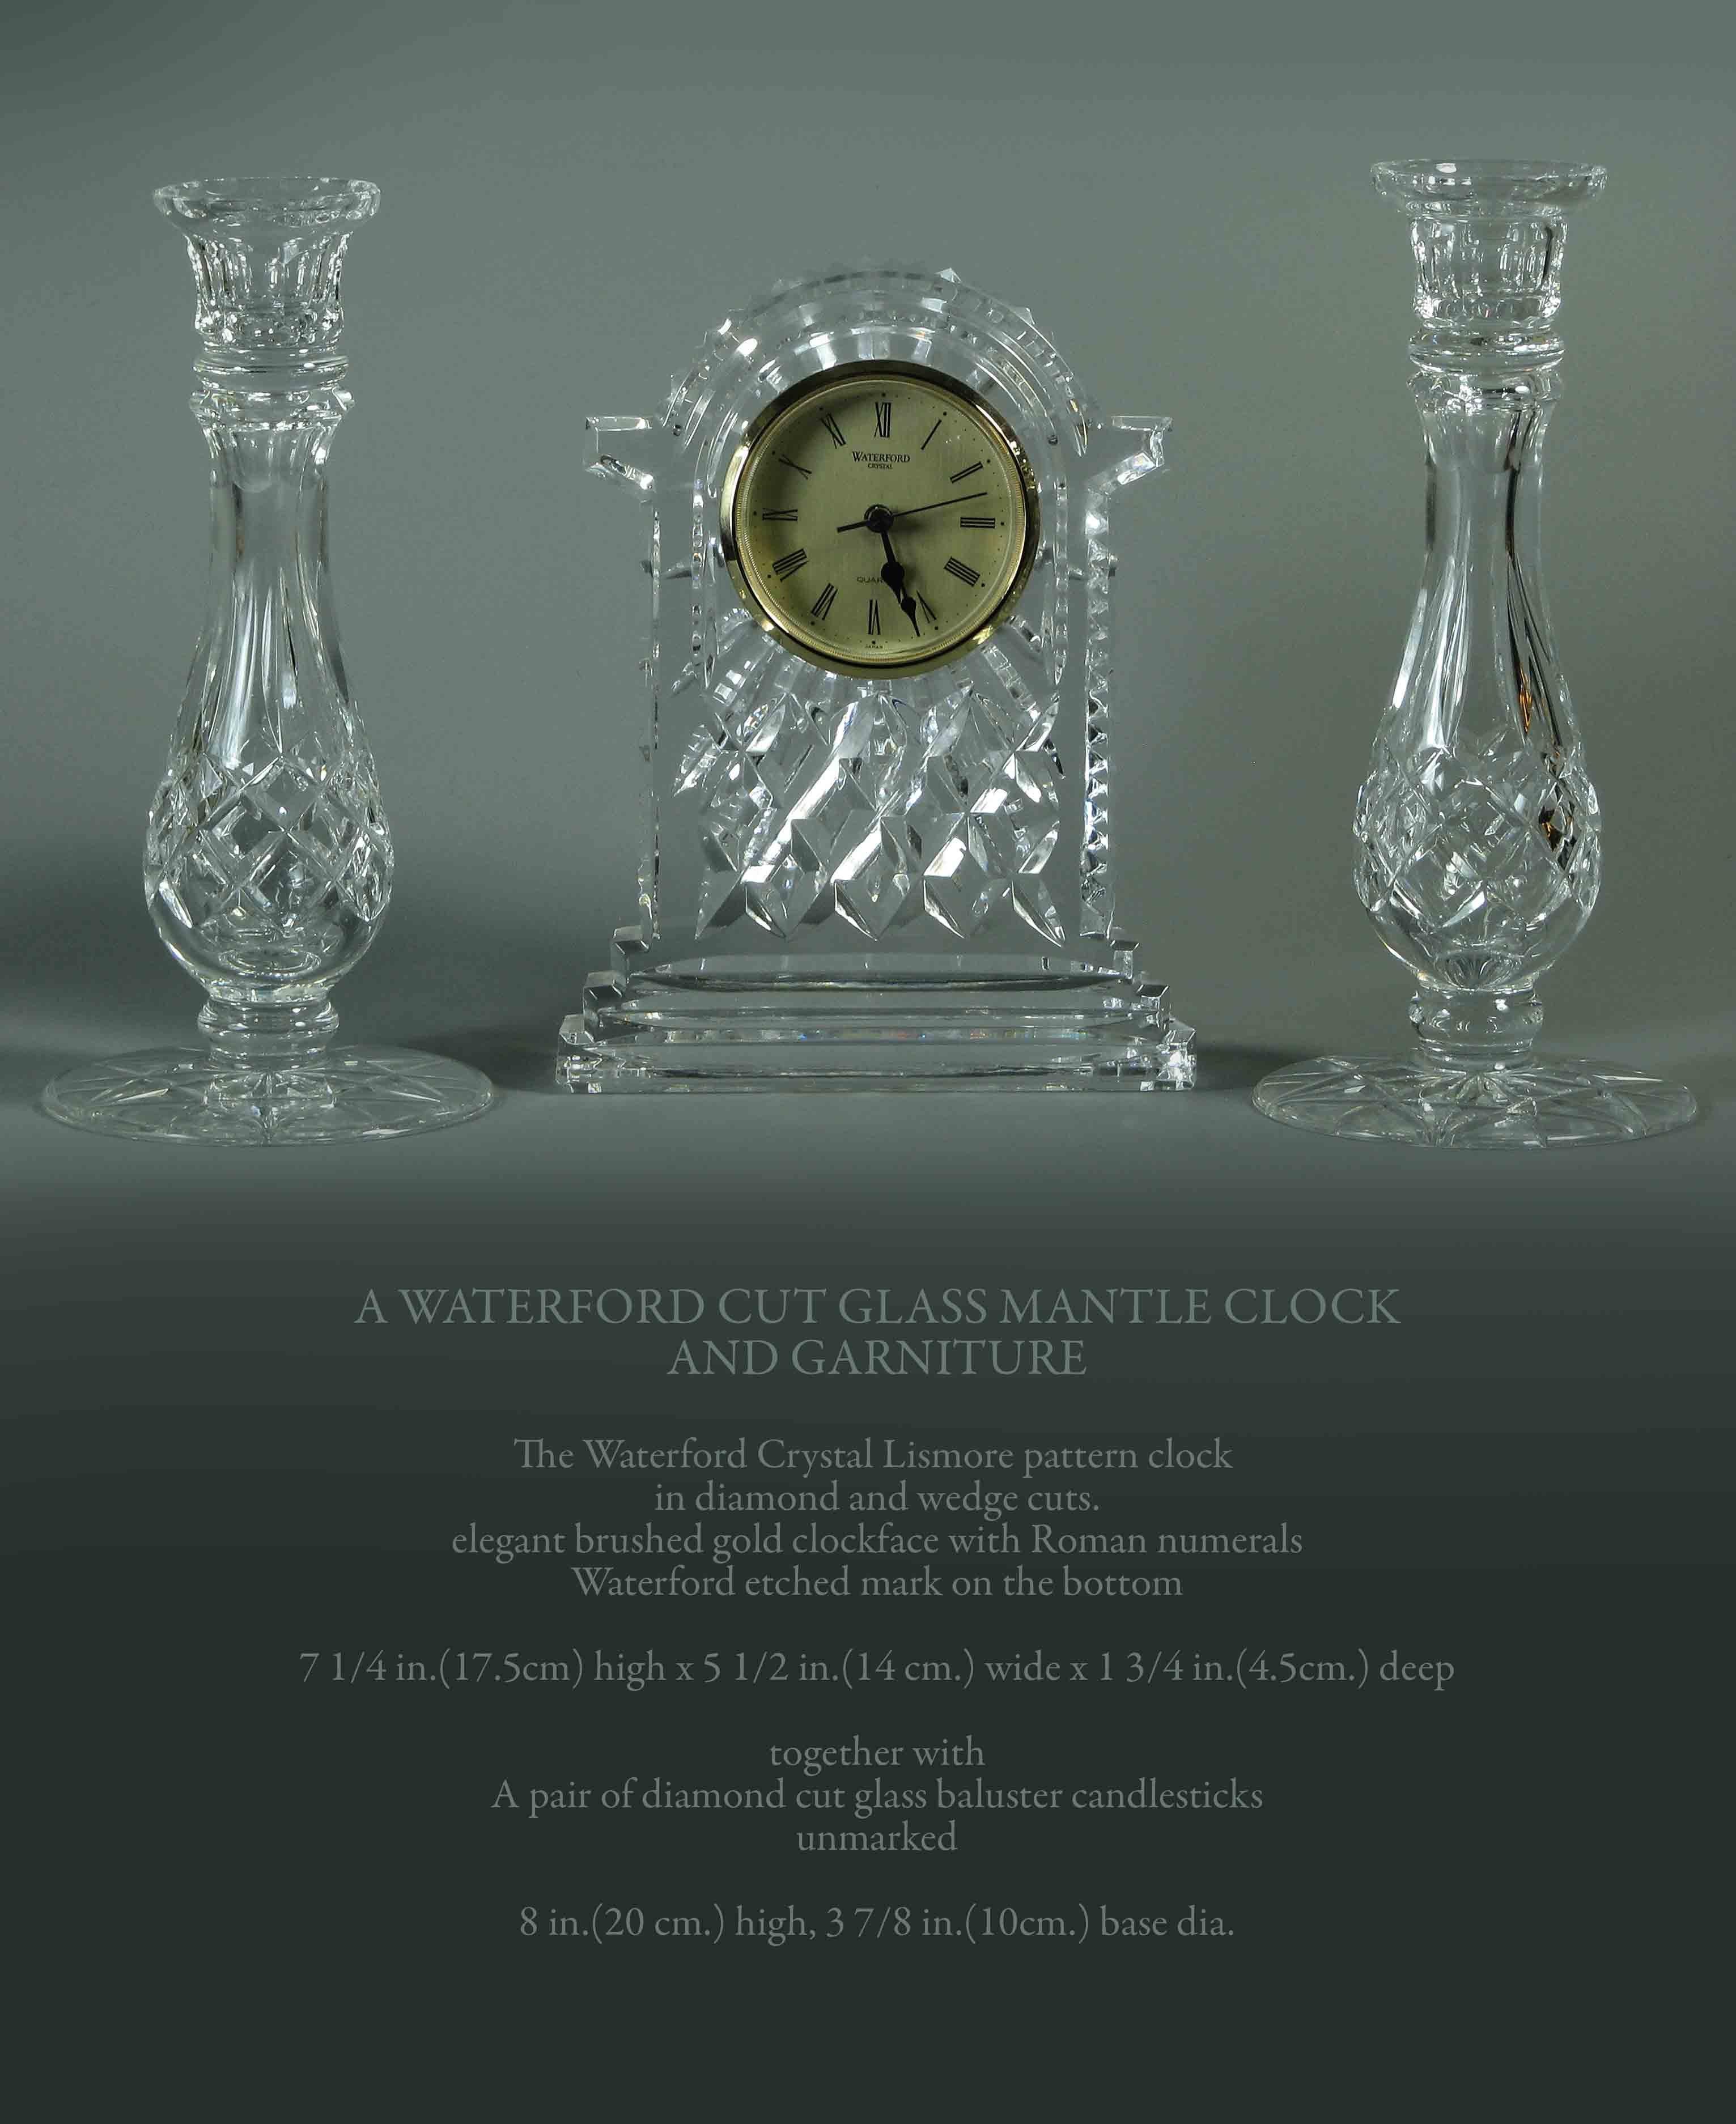 Molded Waterford Cut Glass Mantle Clock and Garniture